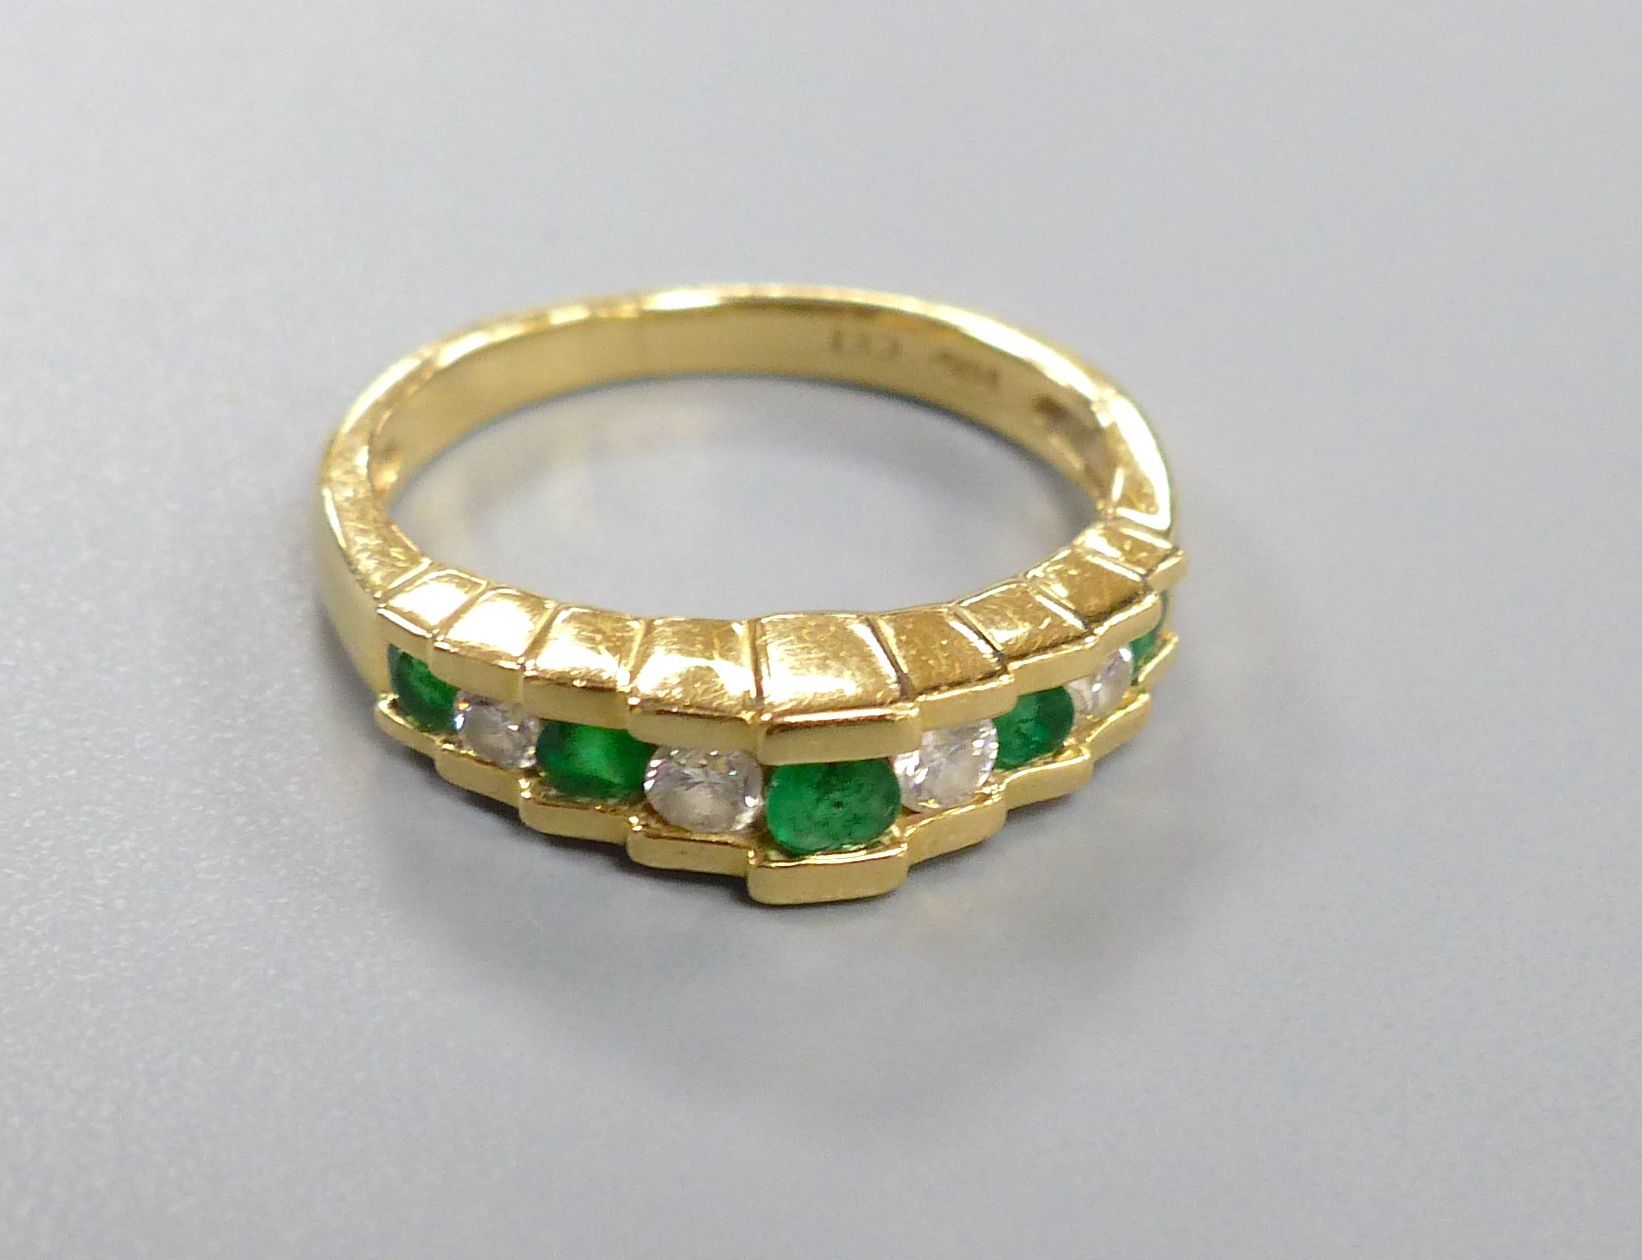 An Art Deco style emerald and diamond nine-stone ring in stepped setting, stamped 14K, size K, gross 3.5 grams.